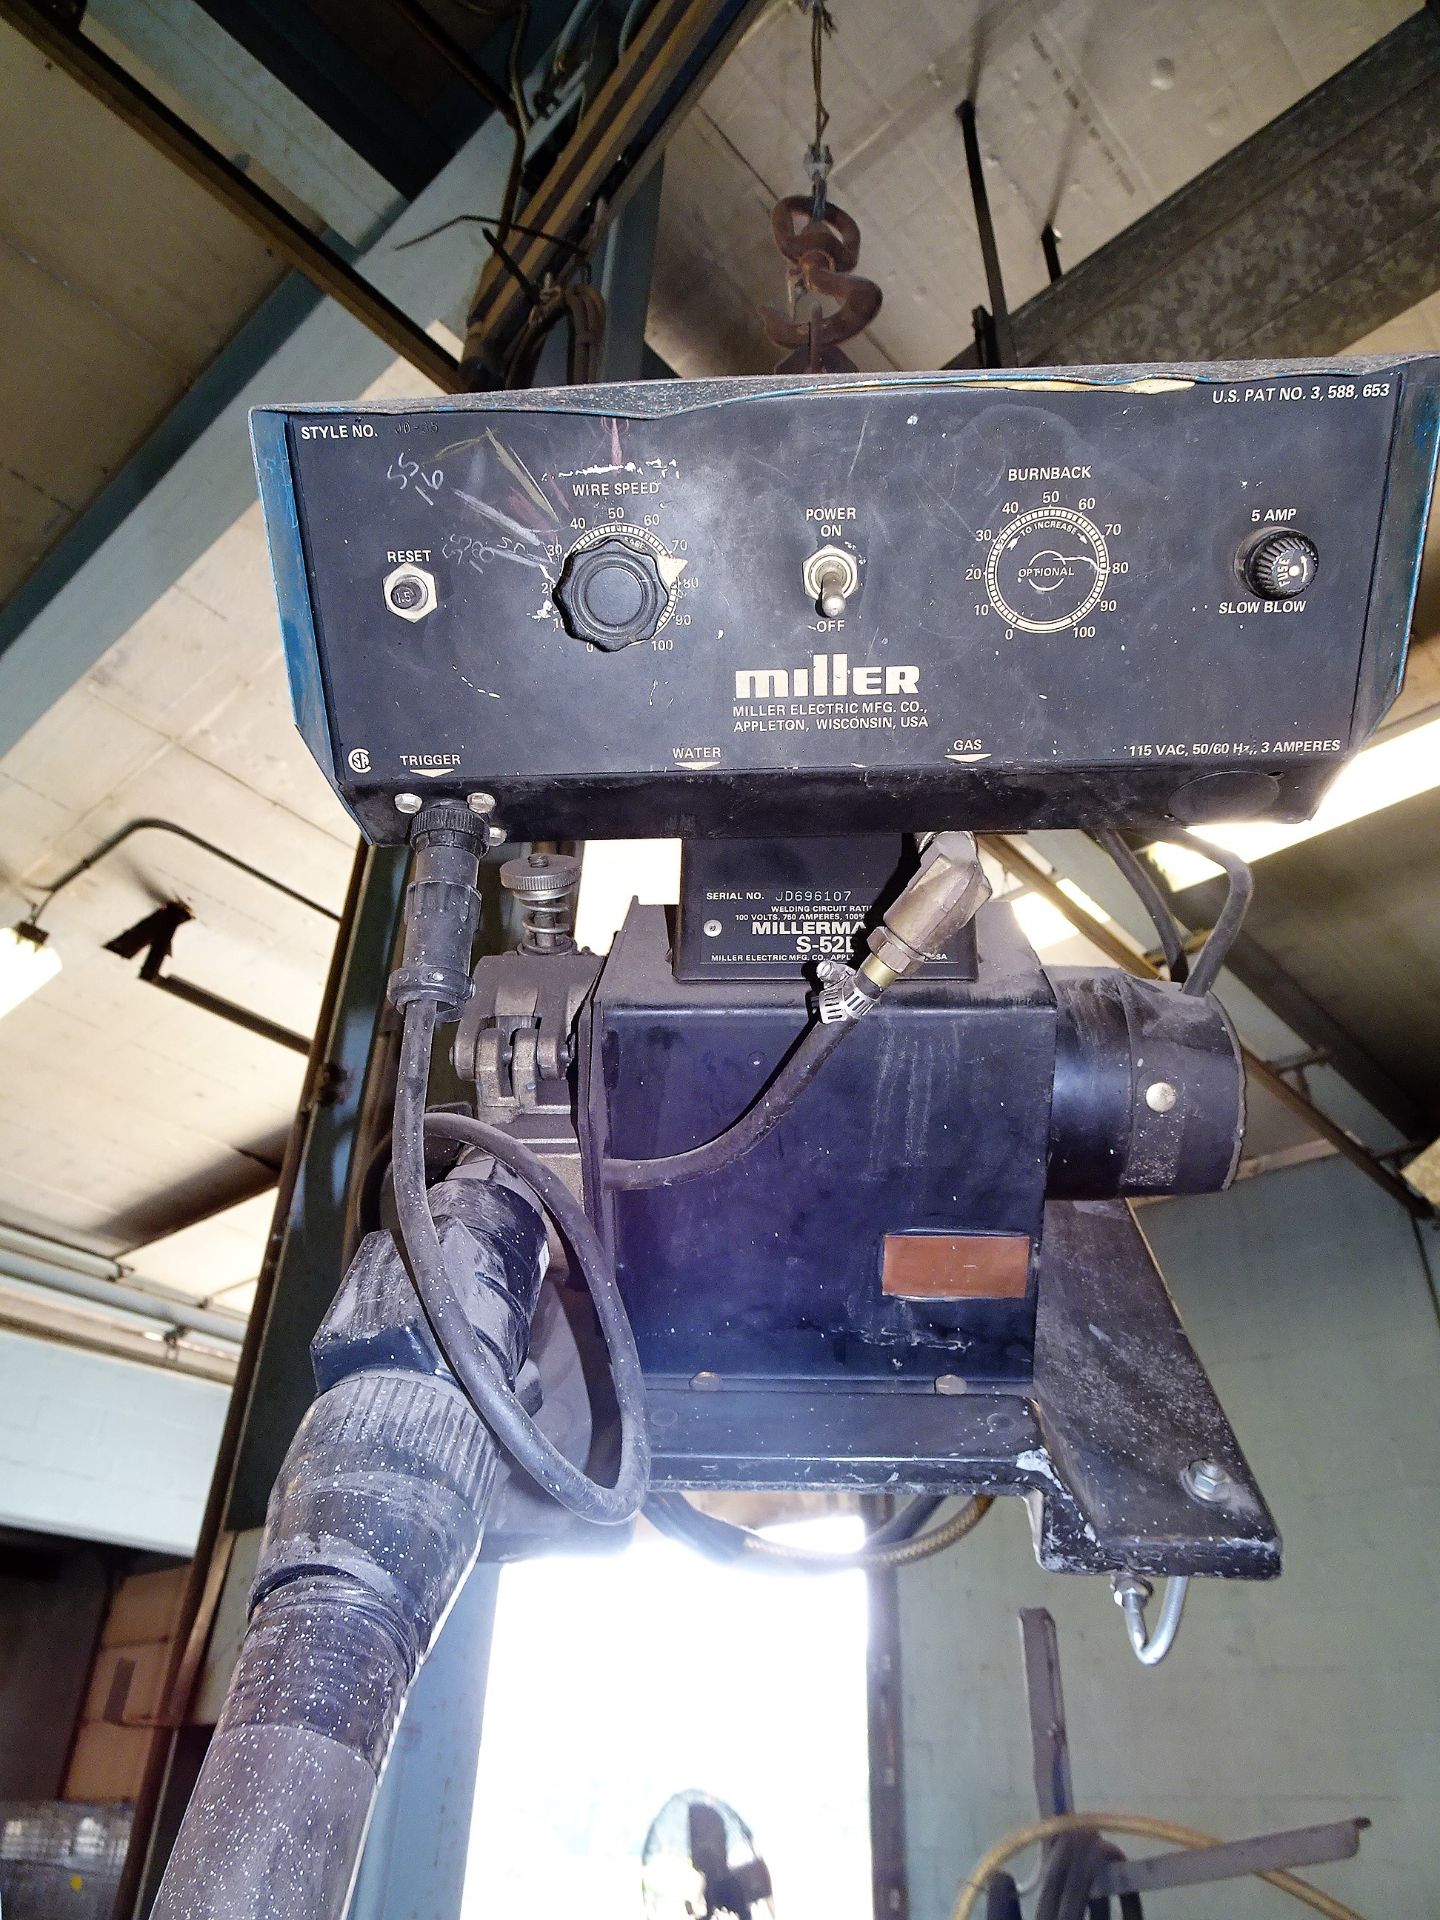 Miller Mdl. CP-250TS Constant Potential D.C. Welder with Miller Wire Feed, Mdl. Millermatic S-52E, - Image 4 of 4